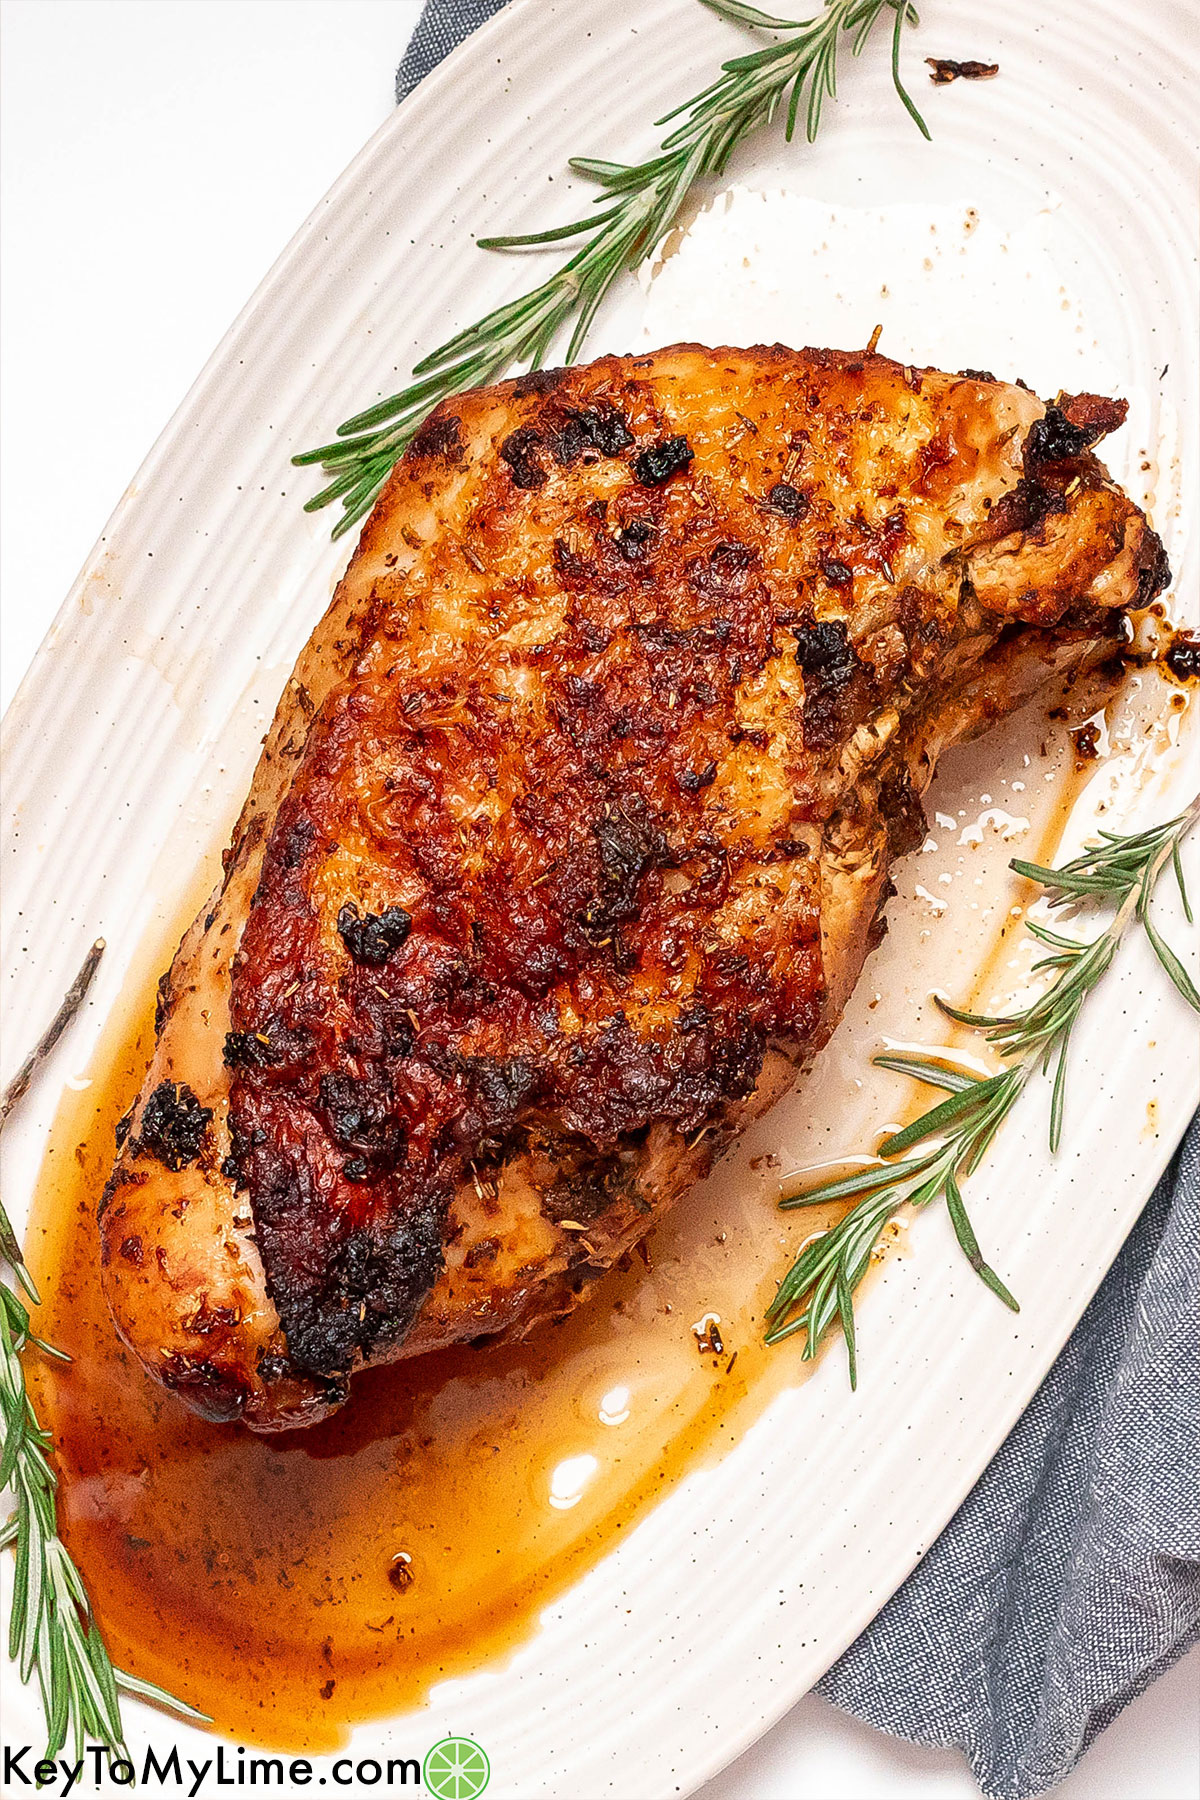 A juicy tender rested turkey breast garnished with rosemary.